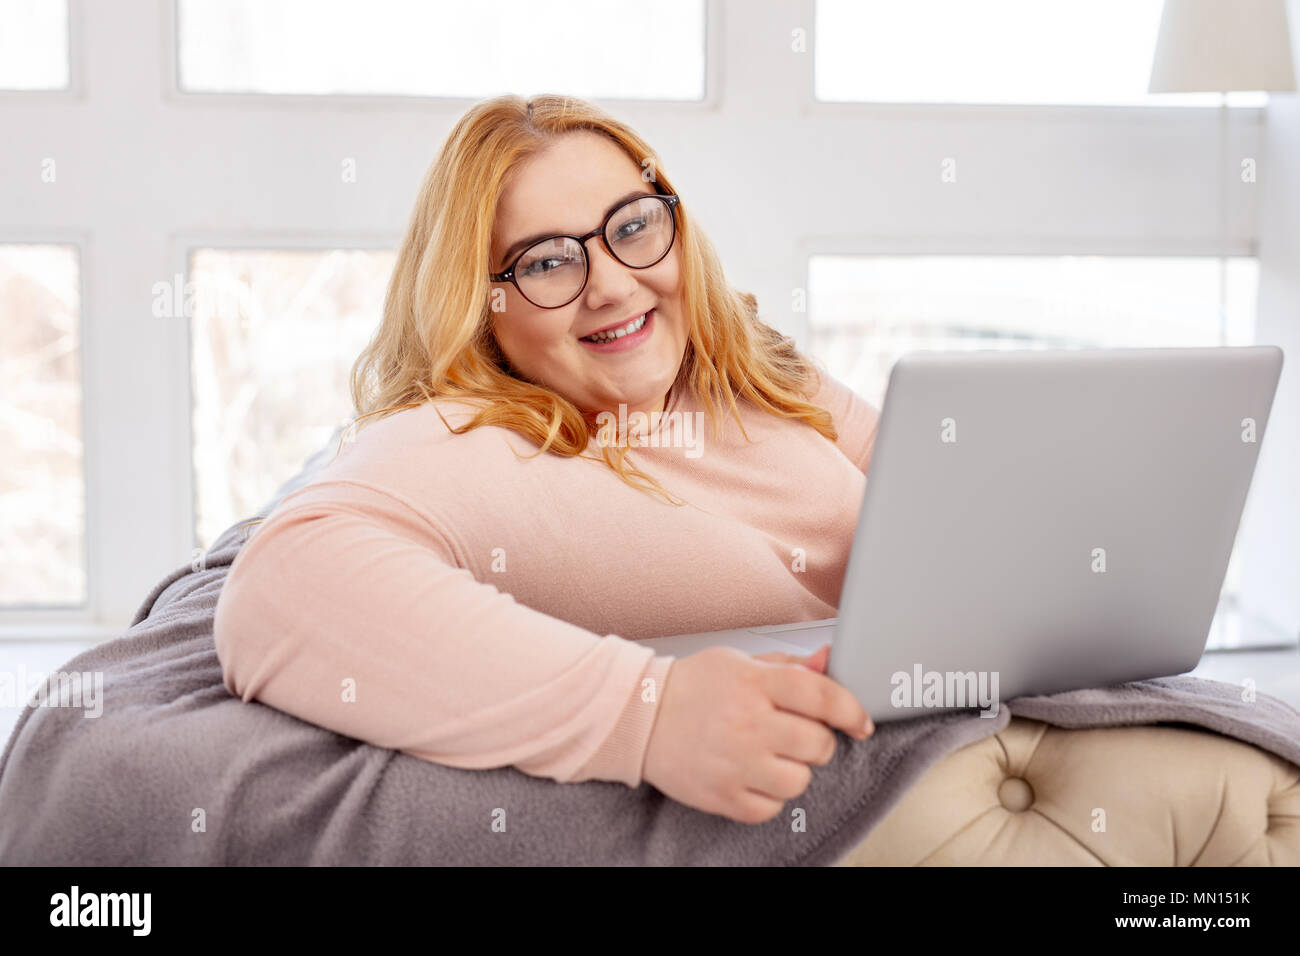 delighted-fat-woman-sitting-with-her-laptop-MN151K.jpg